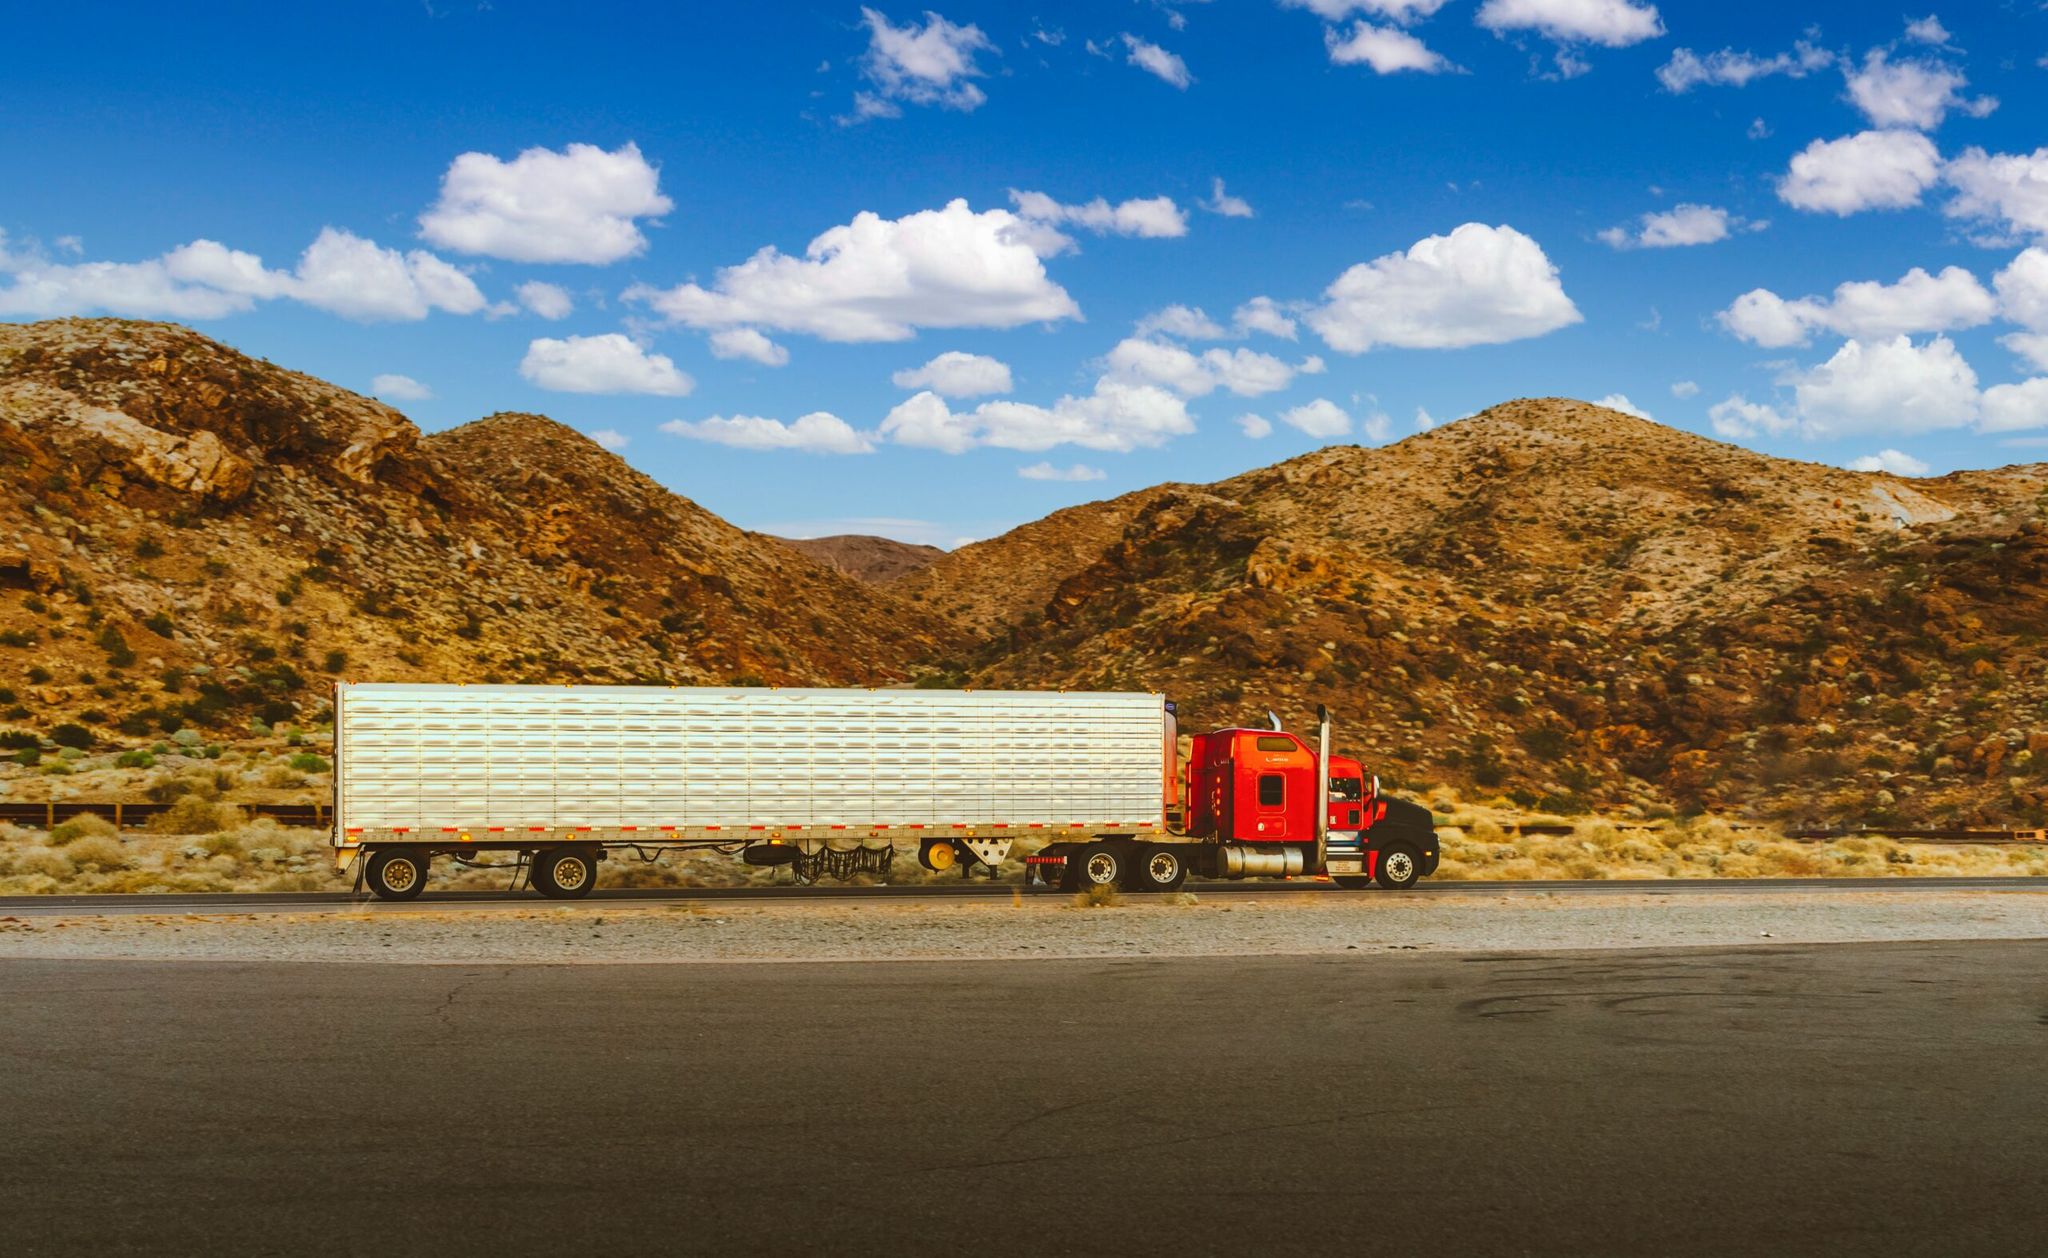 Trucker Dating: What’s the Best Choice in 2023?